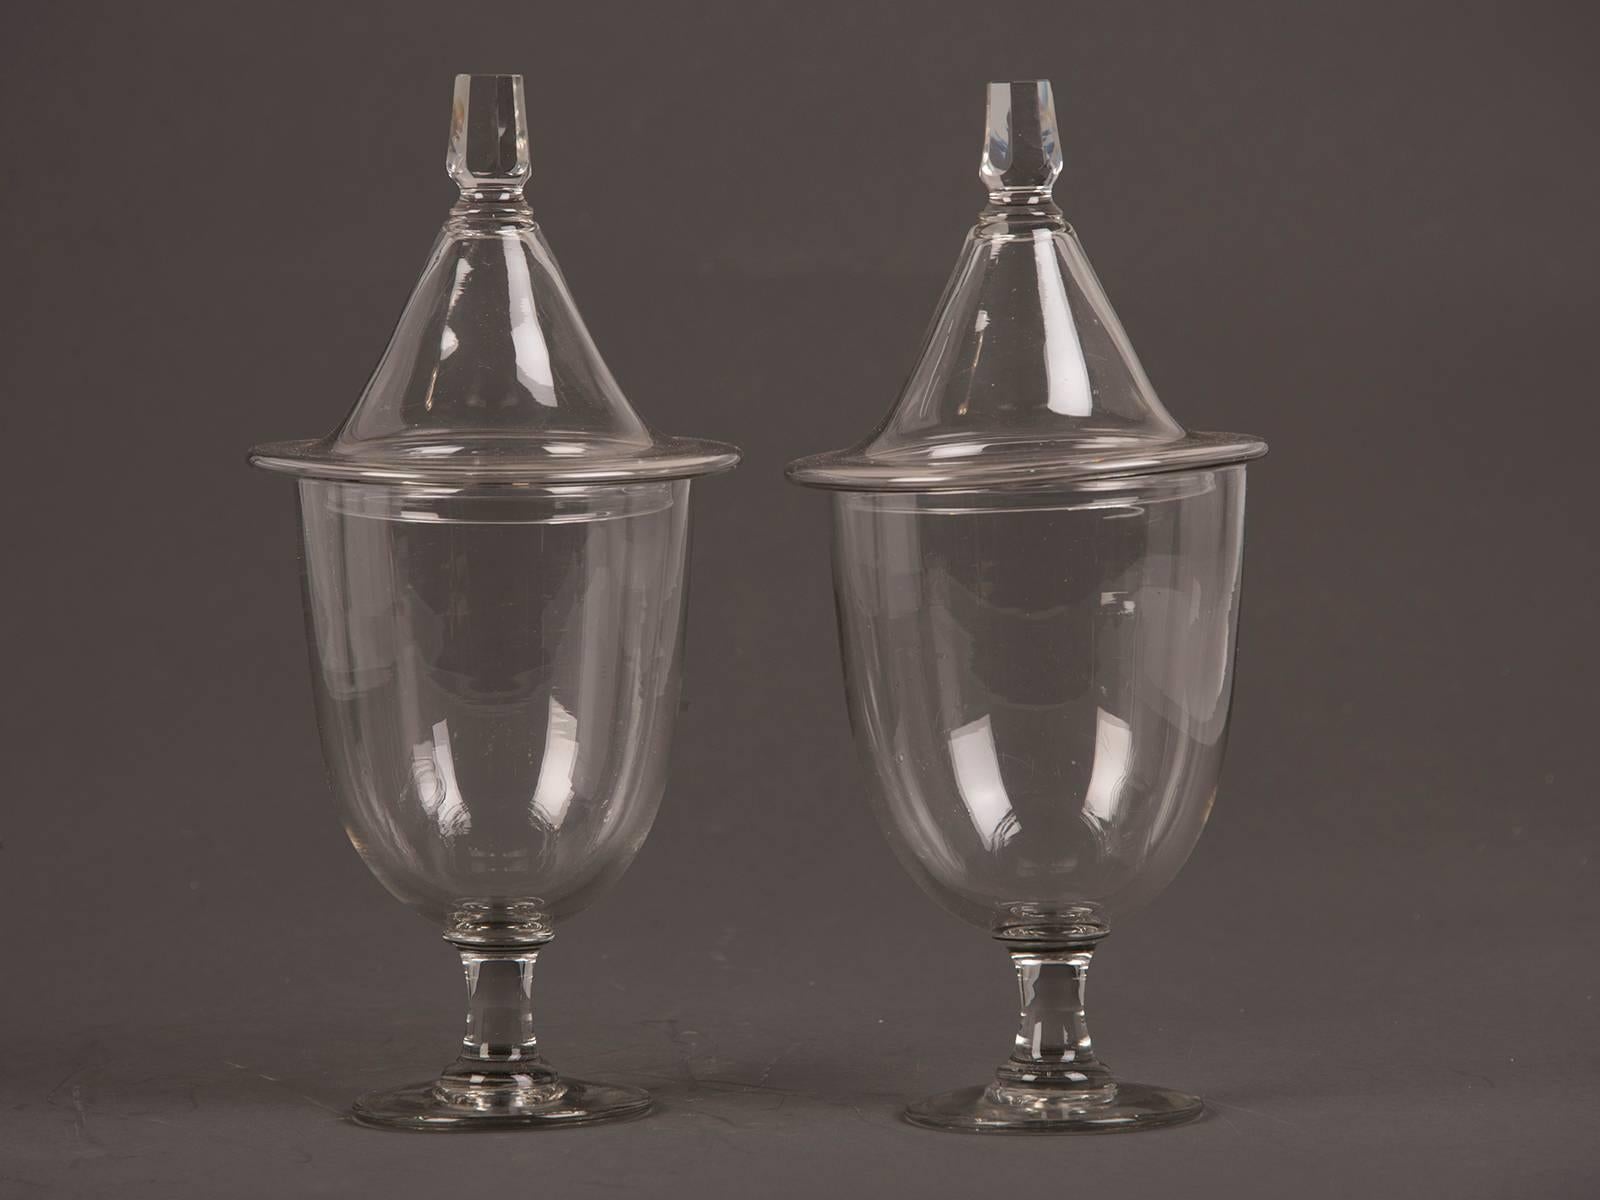 A pair of antique English Regency style glass urns each with a lid, England, circa 1875.